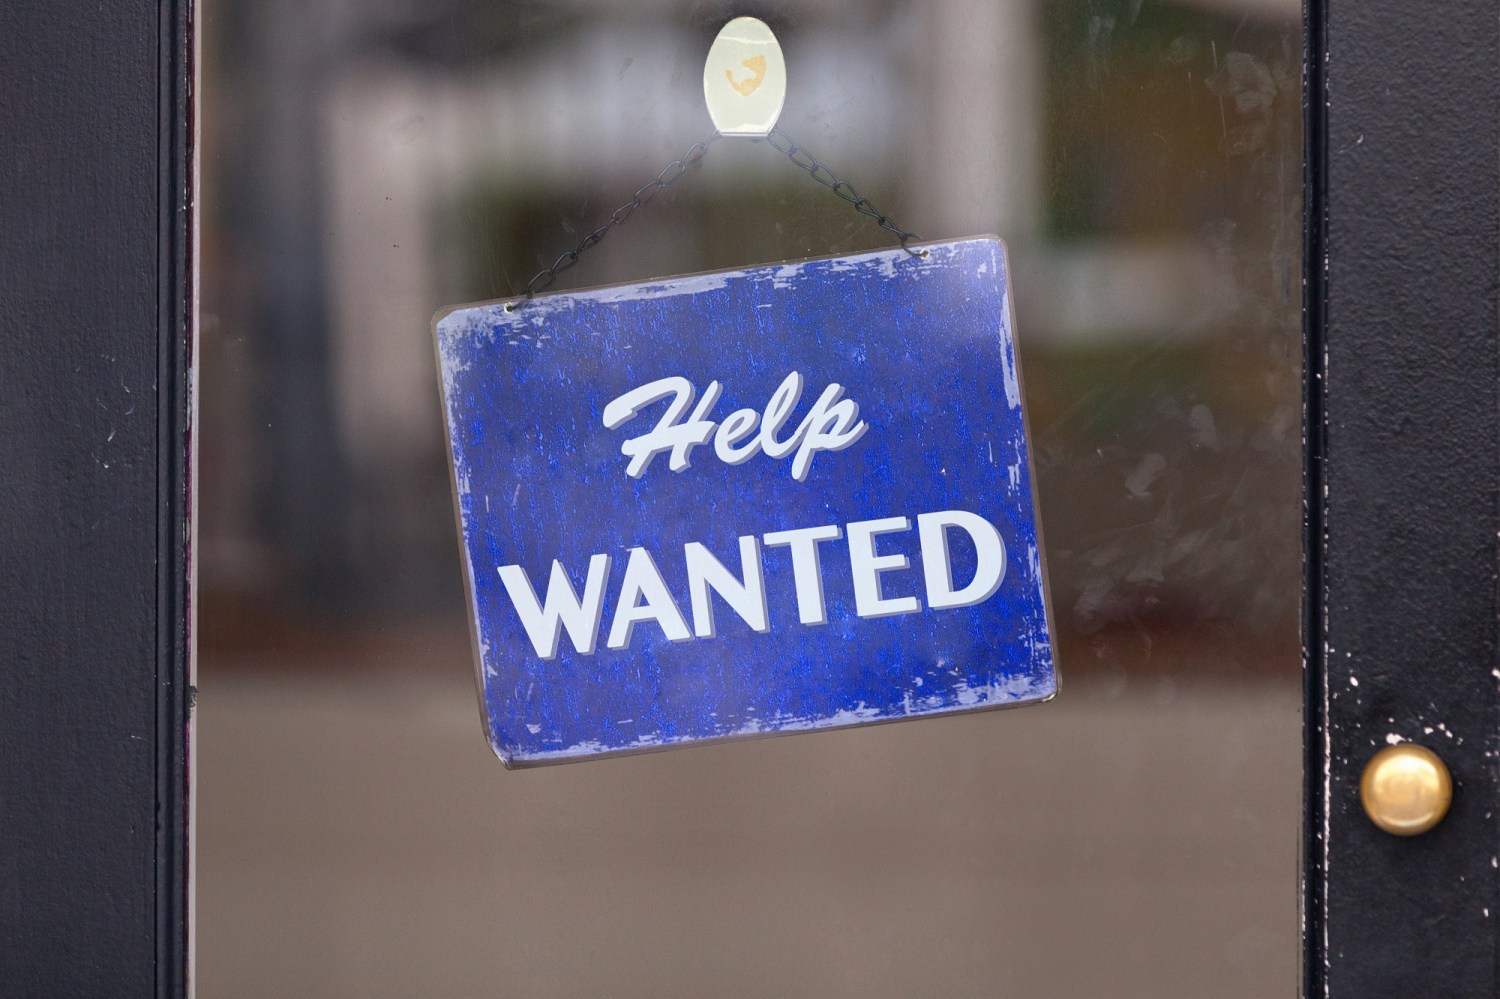 Close-up on a blue help wanted sign.